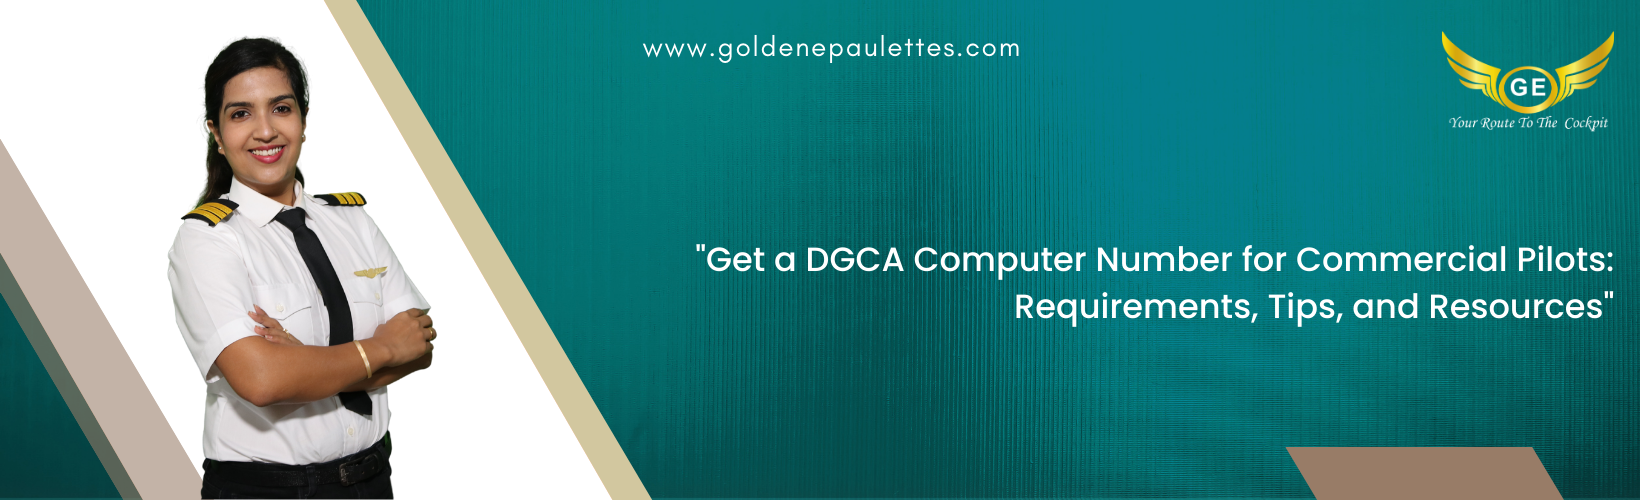 A Guide to Obtaining a DGCA Computer Number for Commercial Pilots